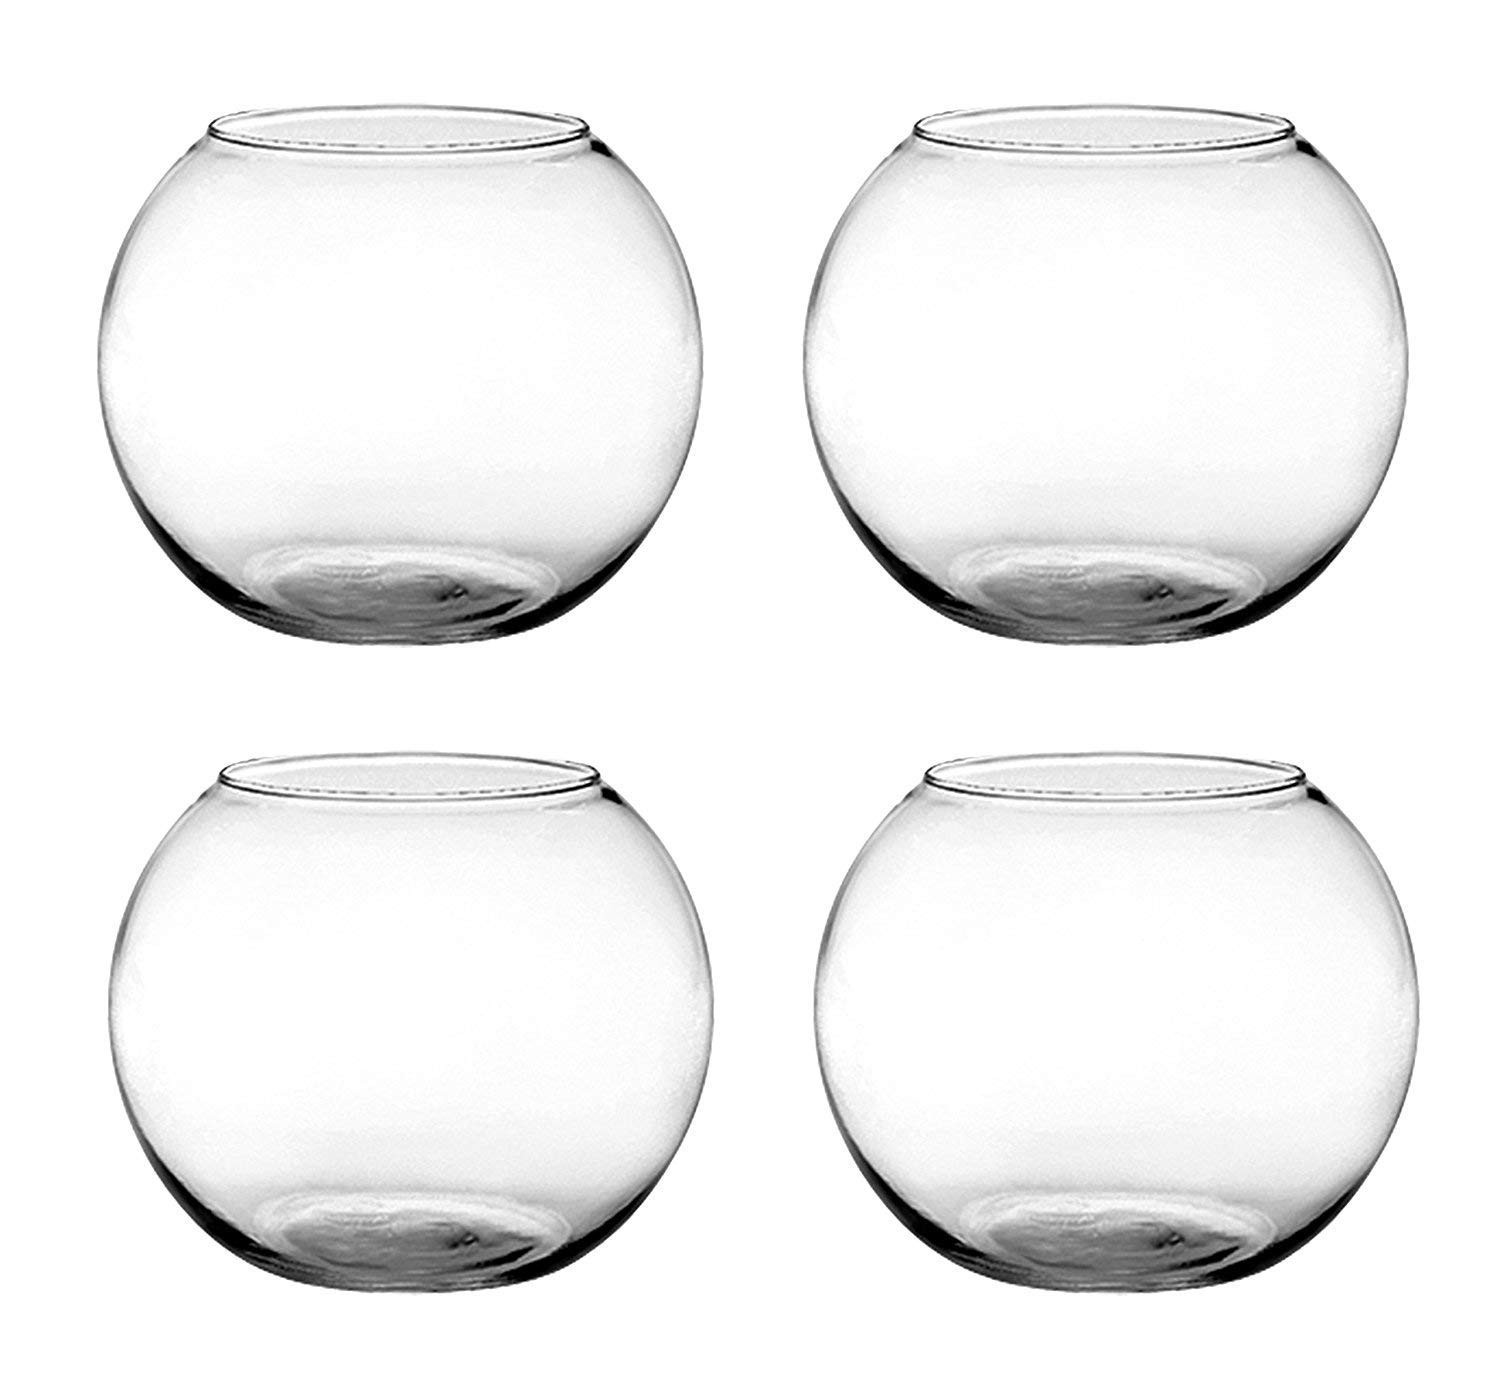 14 Perfect Round Black Glass Vase 2022 free download round black glass vase of amazon com floral supply online set of 4 6 rose bowls glass in amazon com floral supply online set of 4 6 rose bowls glass round vases for weddings events decoratin